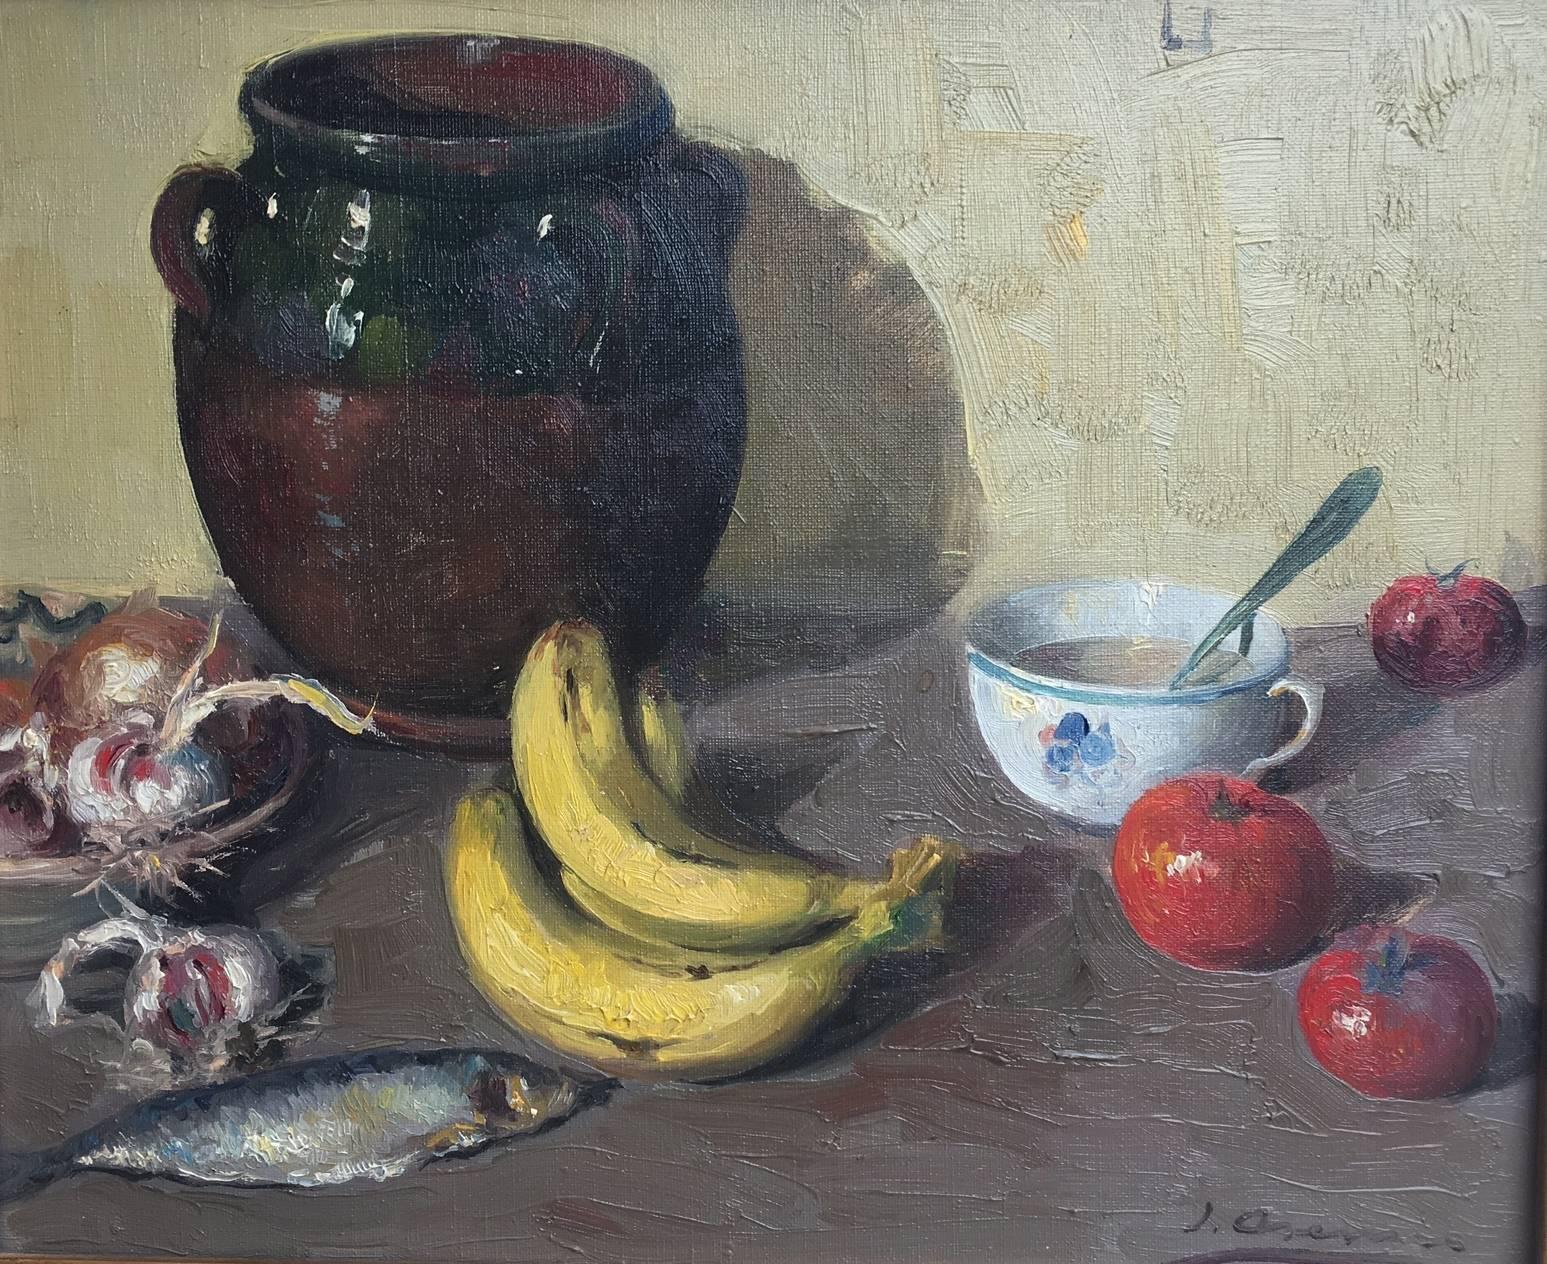  Fruits - original Still-life acrylic Painting 
 Asensio Mariné (Barcelona, 1890-1961) was a painter who specialized in landscapes, figures and still lifes of marked realism, that carried out a handful of personal and collective exhibitions in